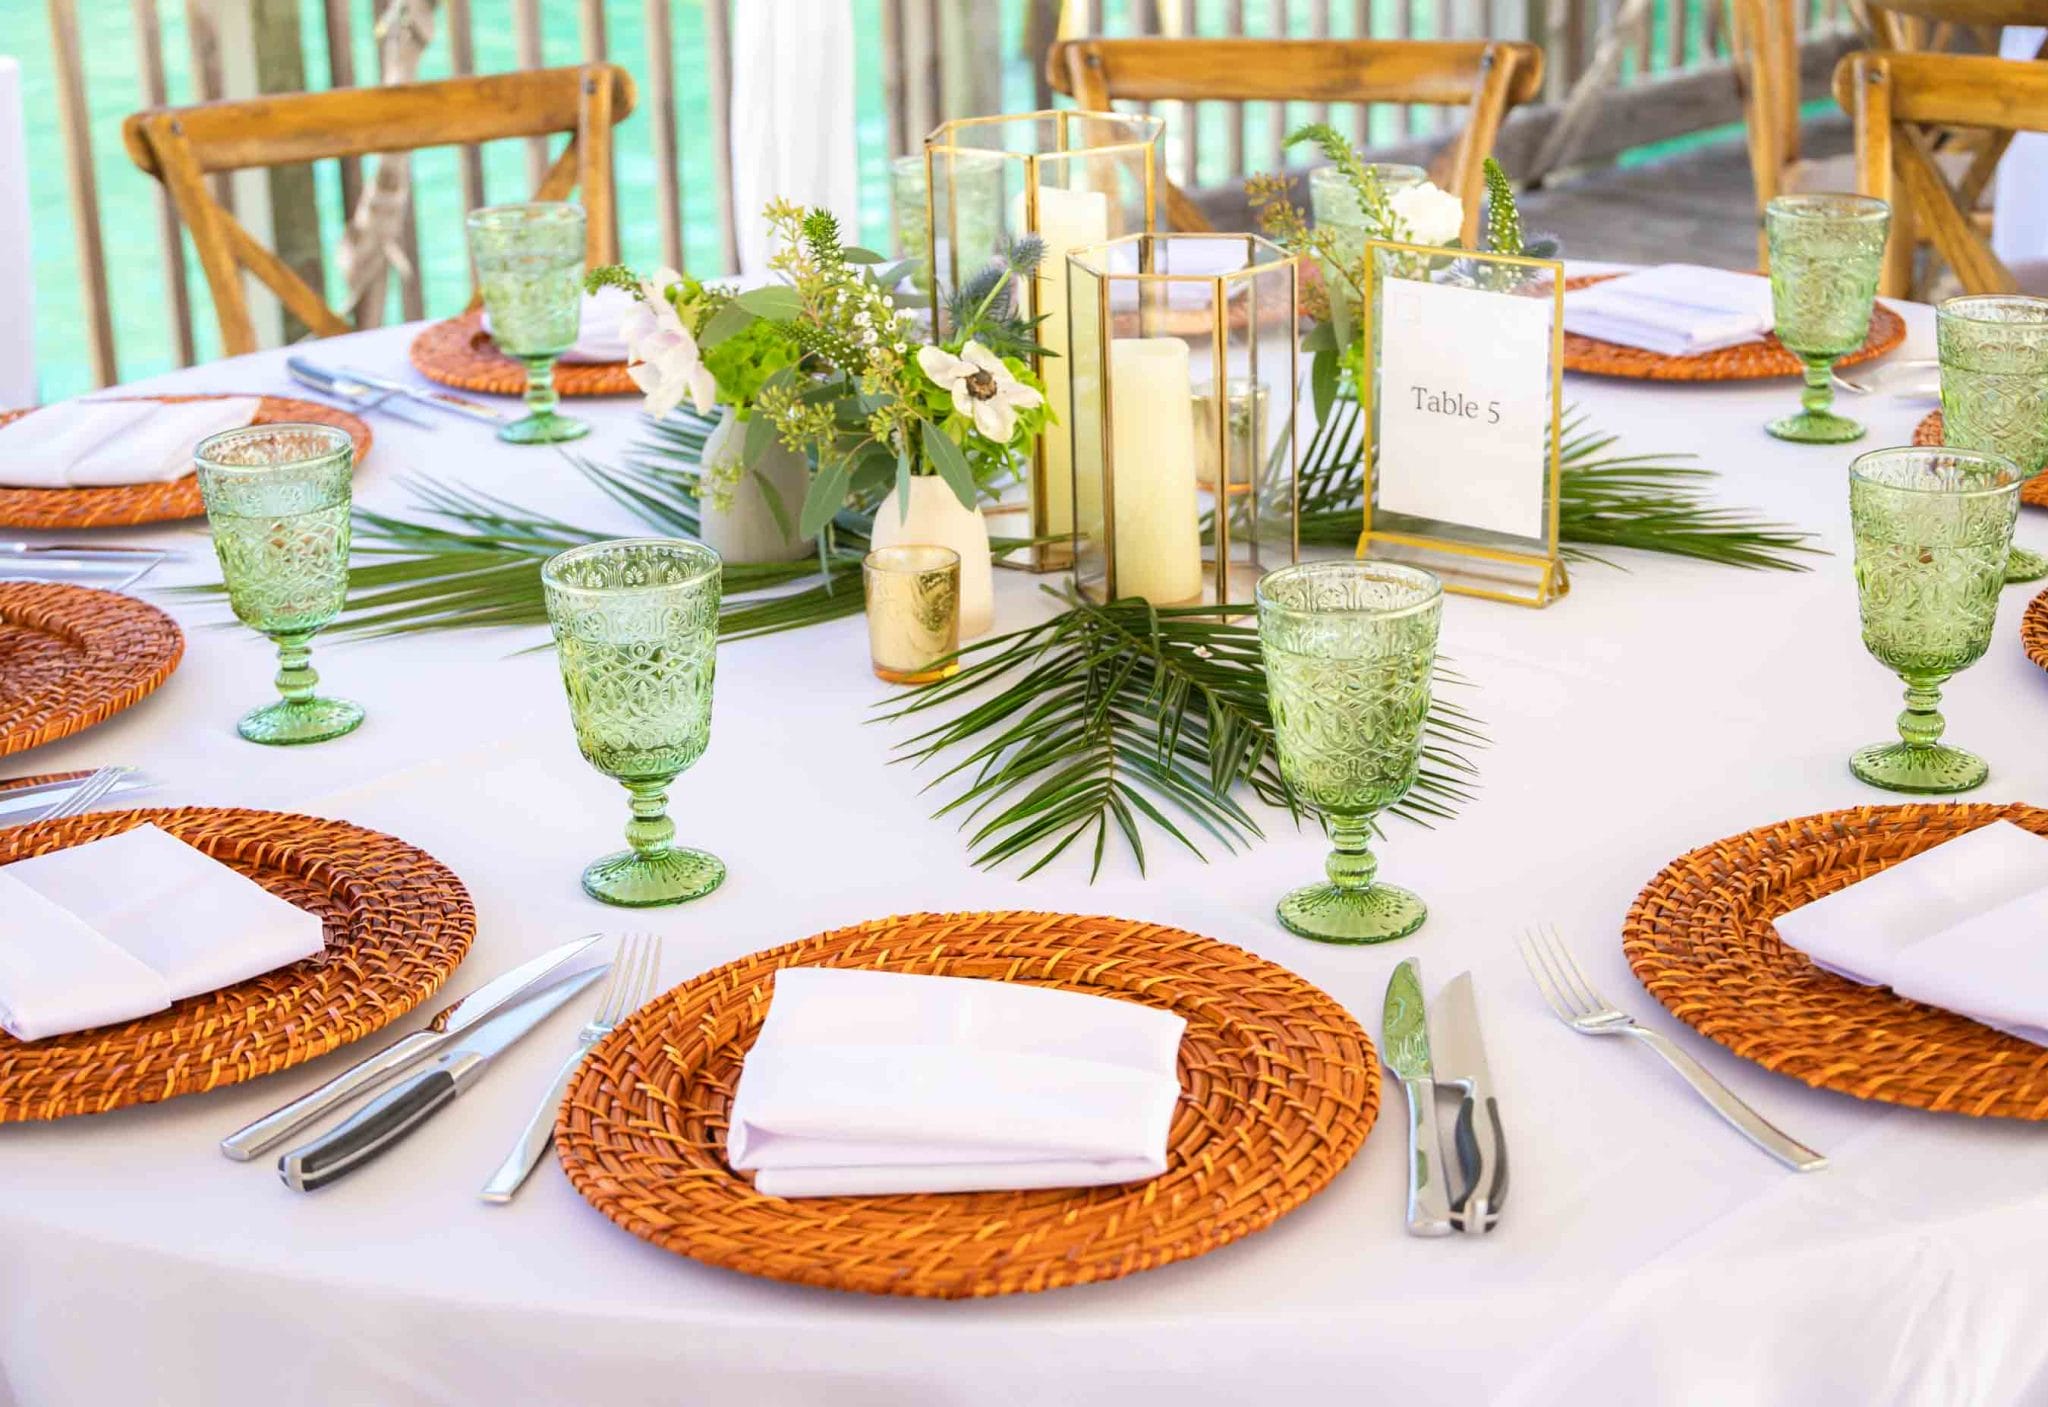 The image shows a table setting from a top-down perspective, part of a larger event setup. There's a focus on natural and earthy tones. A white tablecloth serves as the base, with a centerpiece composed of green tropical leaves, white candles of varying heights, and clear glassware. Each place setting has a woven rattan charger, white dinner plate, green glass goblet, and silverware. The style suggests a tropical, elegant theme, likely for an event such as a wedding or upscale dinner. The setting exudes a relaxed yet sophisticated ambiance, potentially fitting for a destination event in a warm, beachside location.